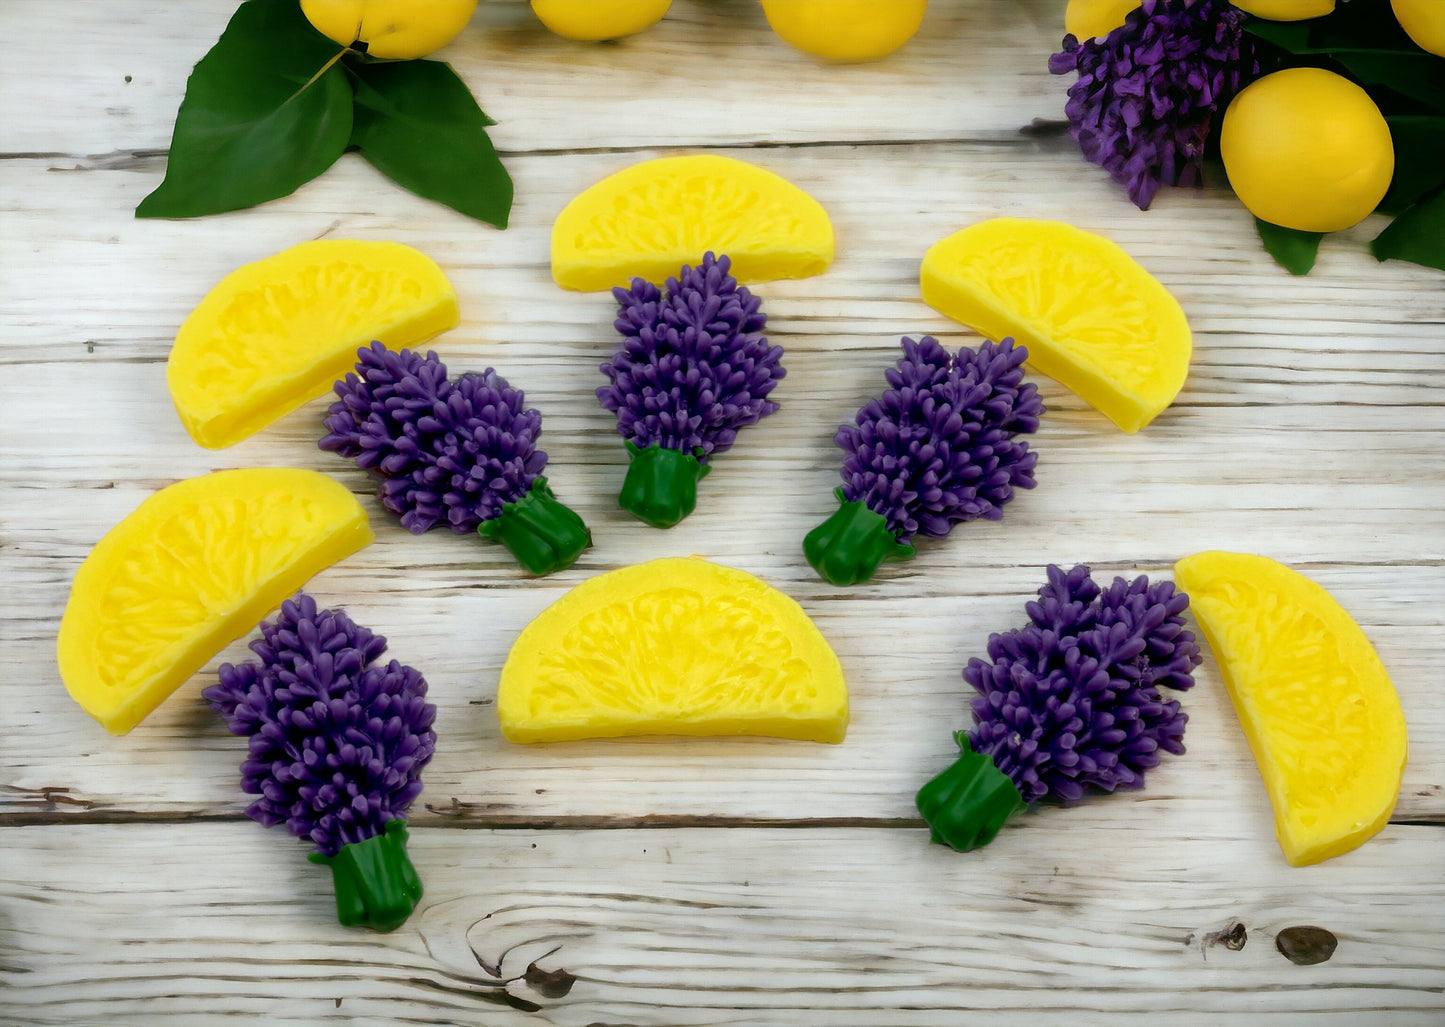 Lavender and Lemons Wax Melts. 5.30 oz. Wax Melt/Soy Wax Melts/Strongly Scented Wax Melts/Wax Tarts for Wax Warmers. 11 Pieces.